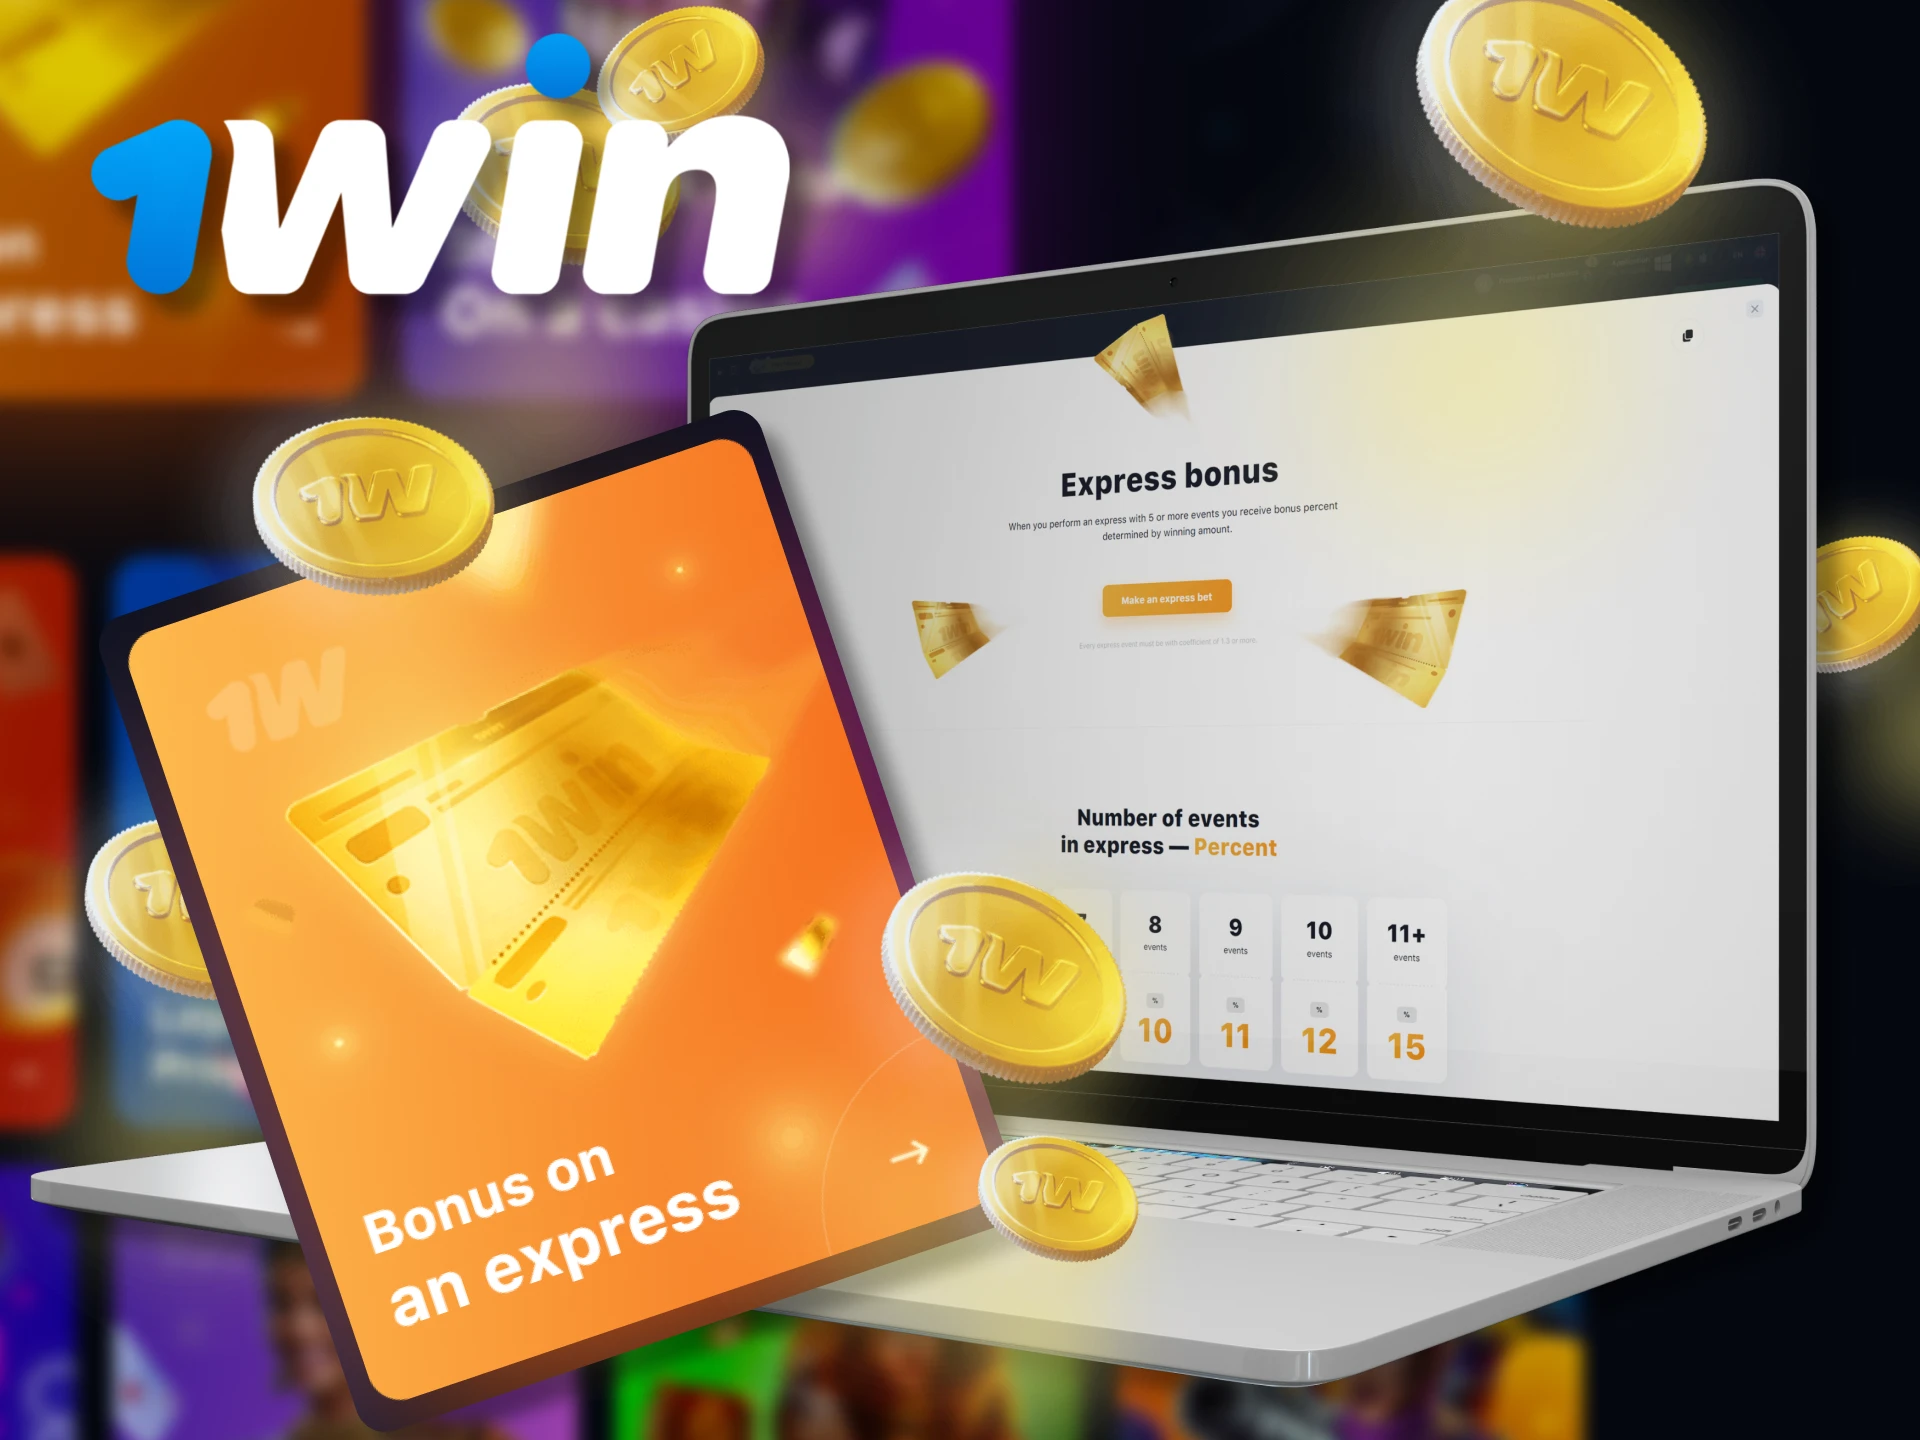 Get a special 1win bonus on an express for betting.